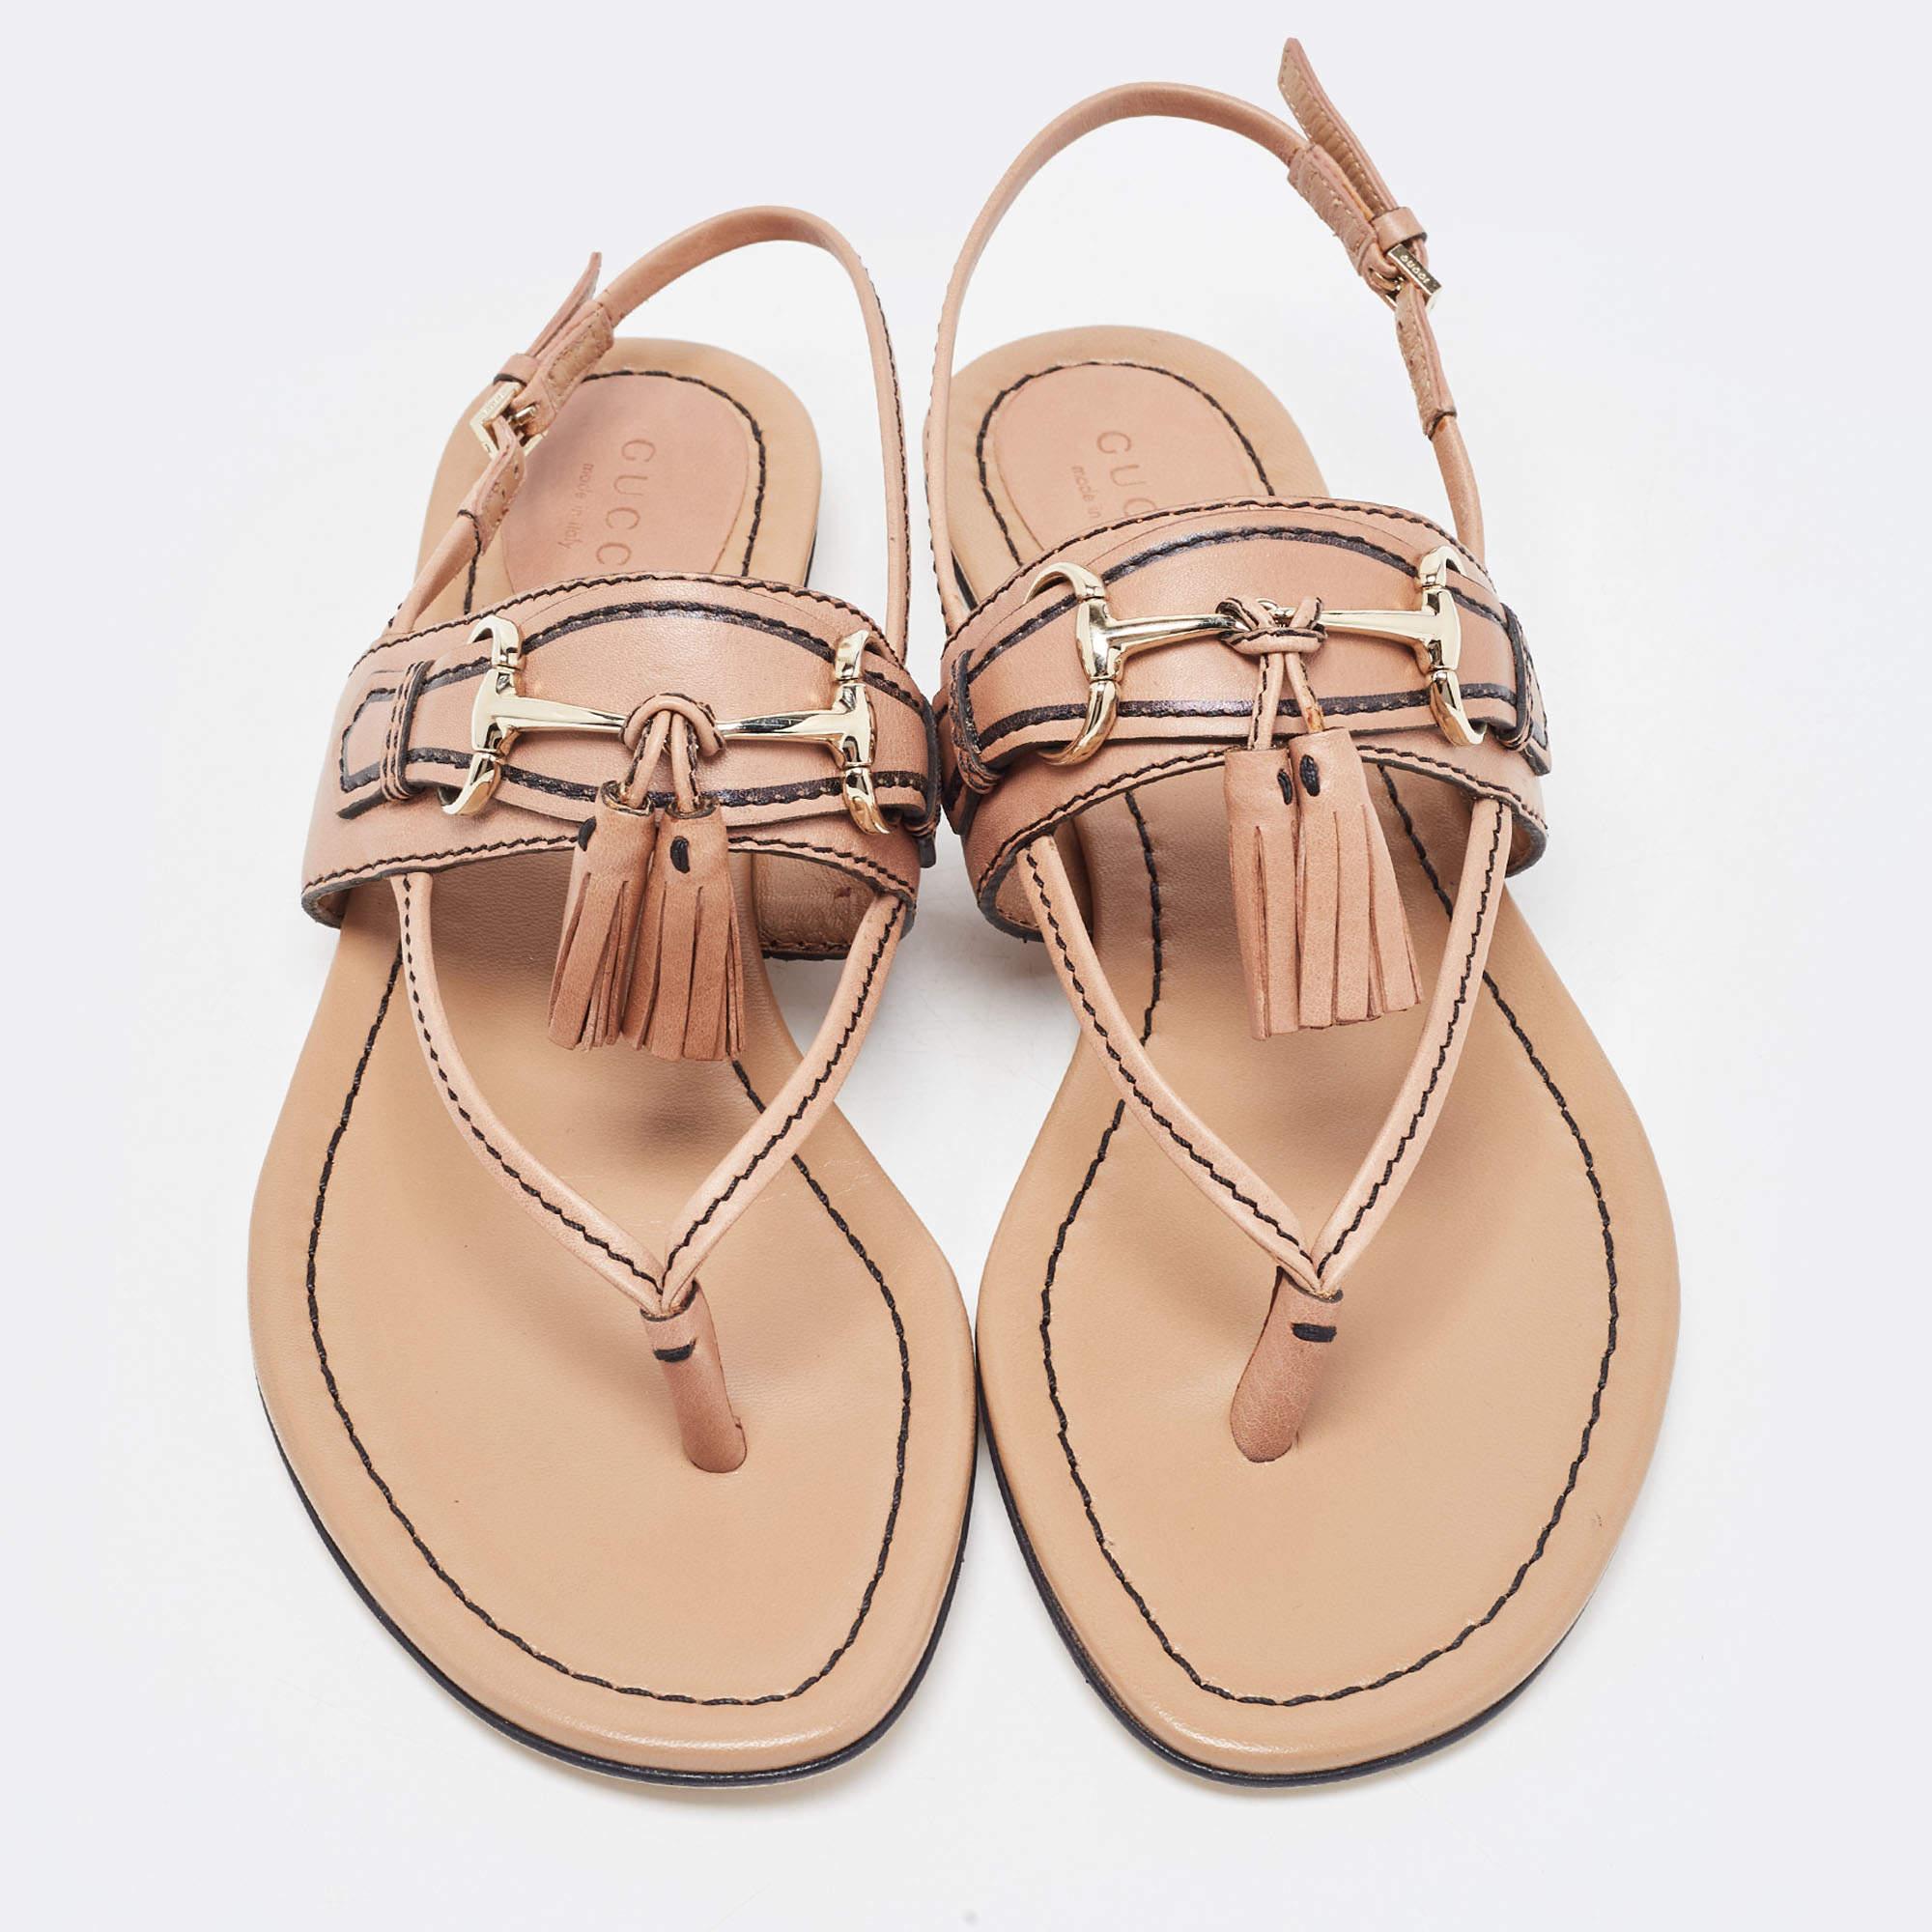 These sandals will frame your feet in an elegant manner. Crafted from quality materials, they display a classy design and comfortable insoles.

Includes
Original Dustbag, Original Box